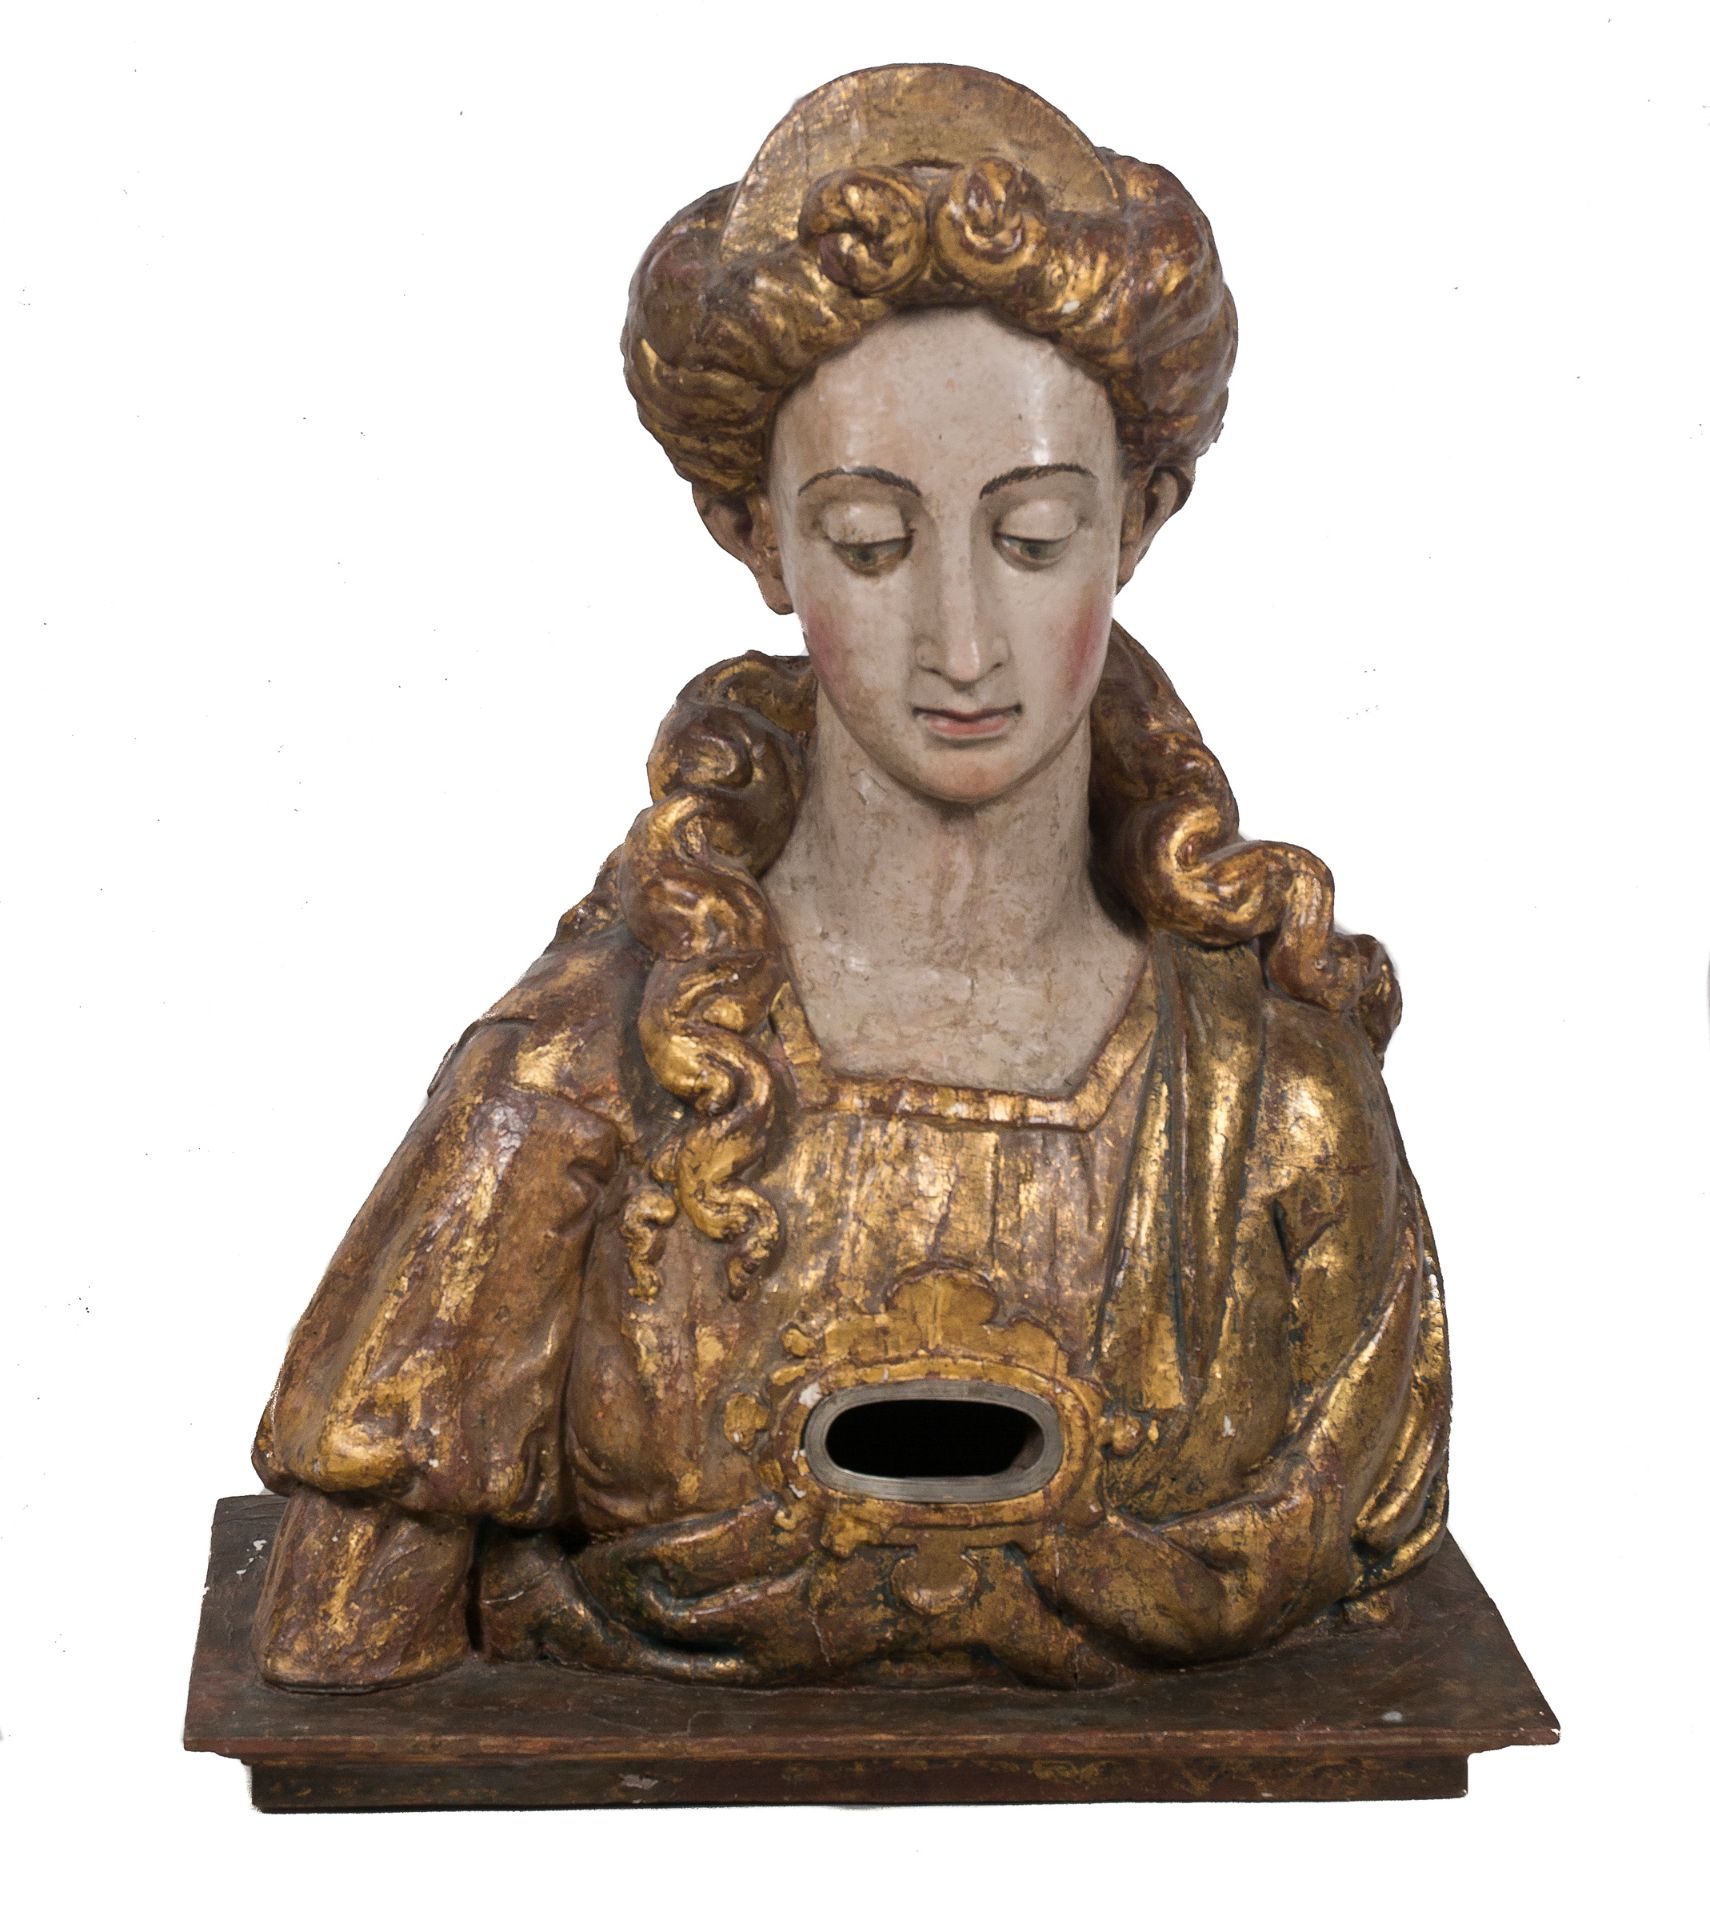 Carved, gilded and polychromed wooden reliquary. 16th century.